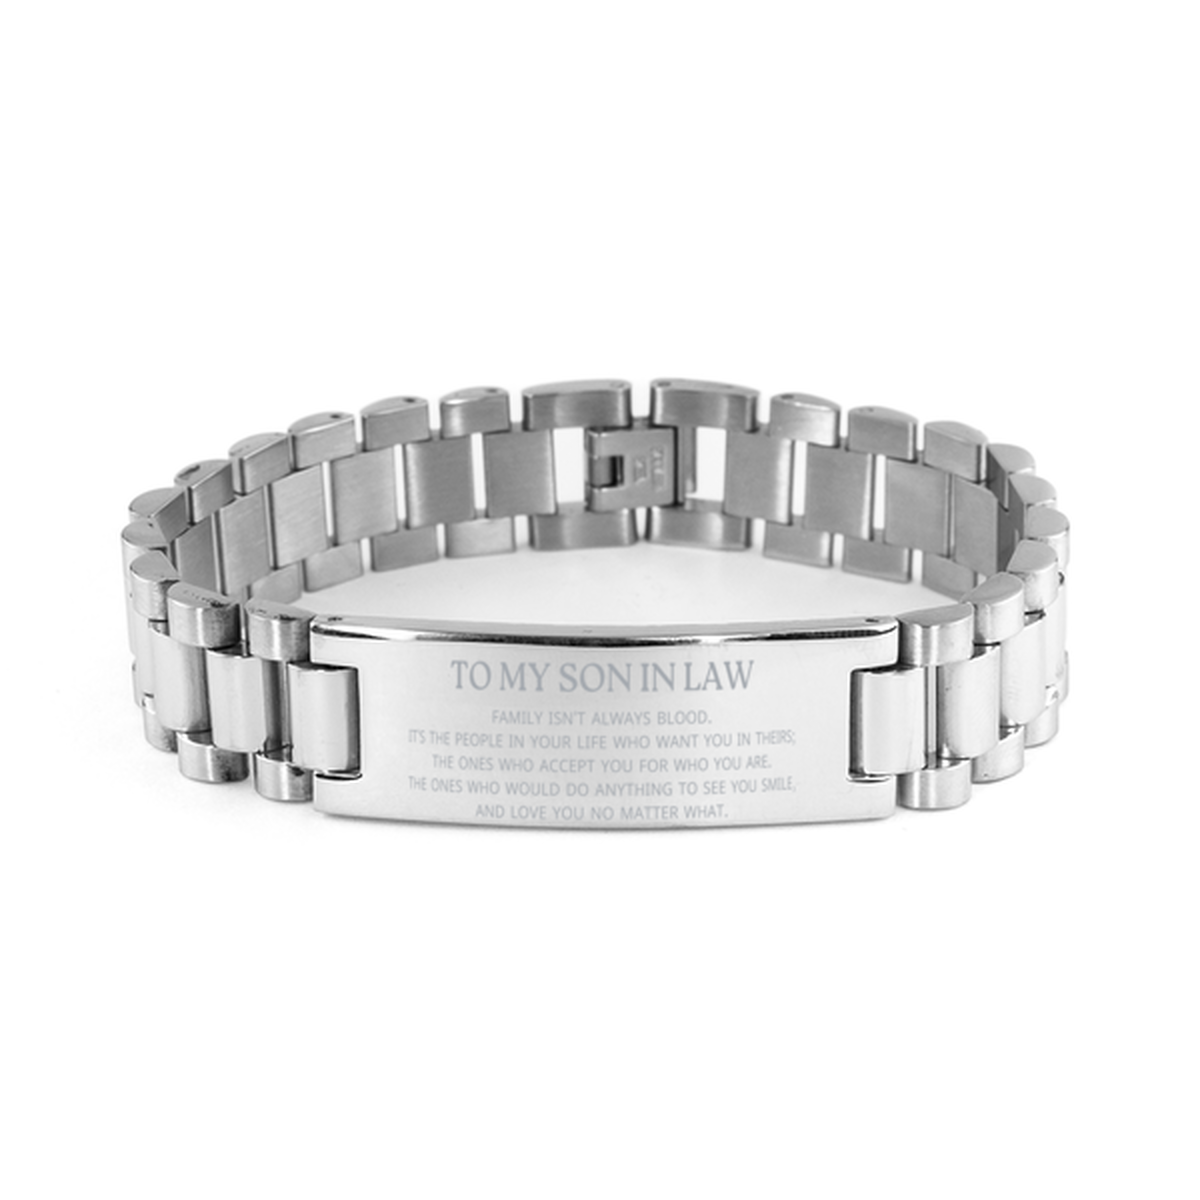 To My Son In Law Gifts, Family isn't always blood, Son In Law Ladder Stainless Steel Bracelet, Birthday Christmas Unique Present For Son In Law